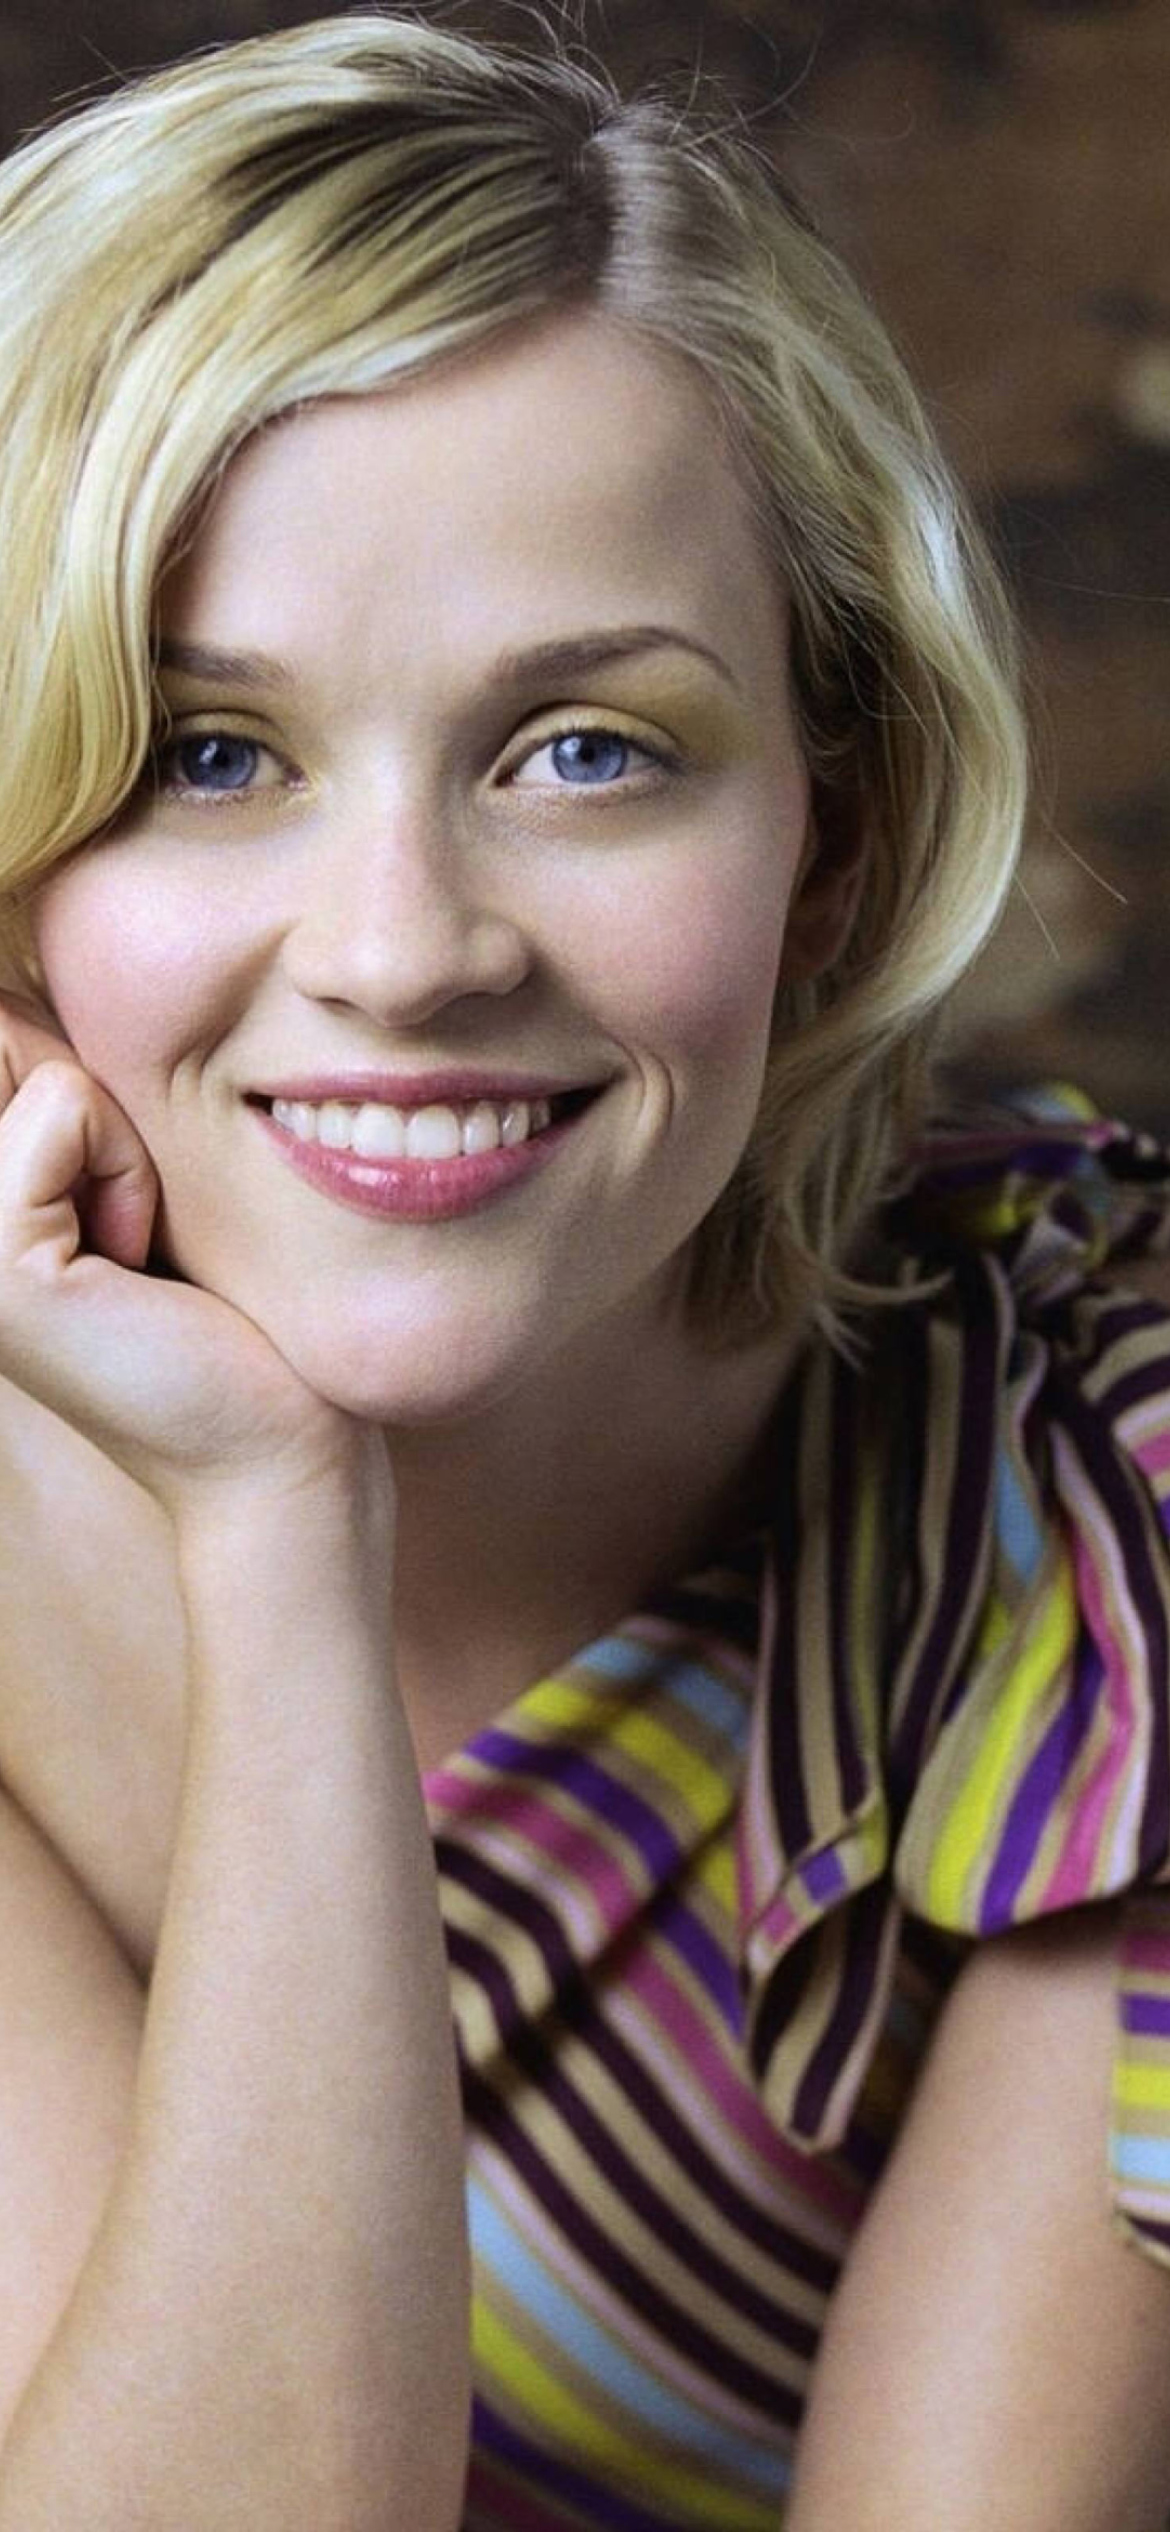 Reese Witherspoon wallpaper 1170x2532